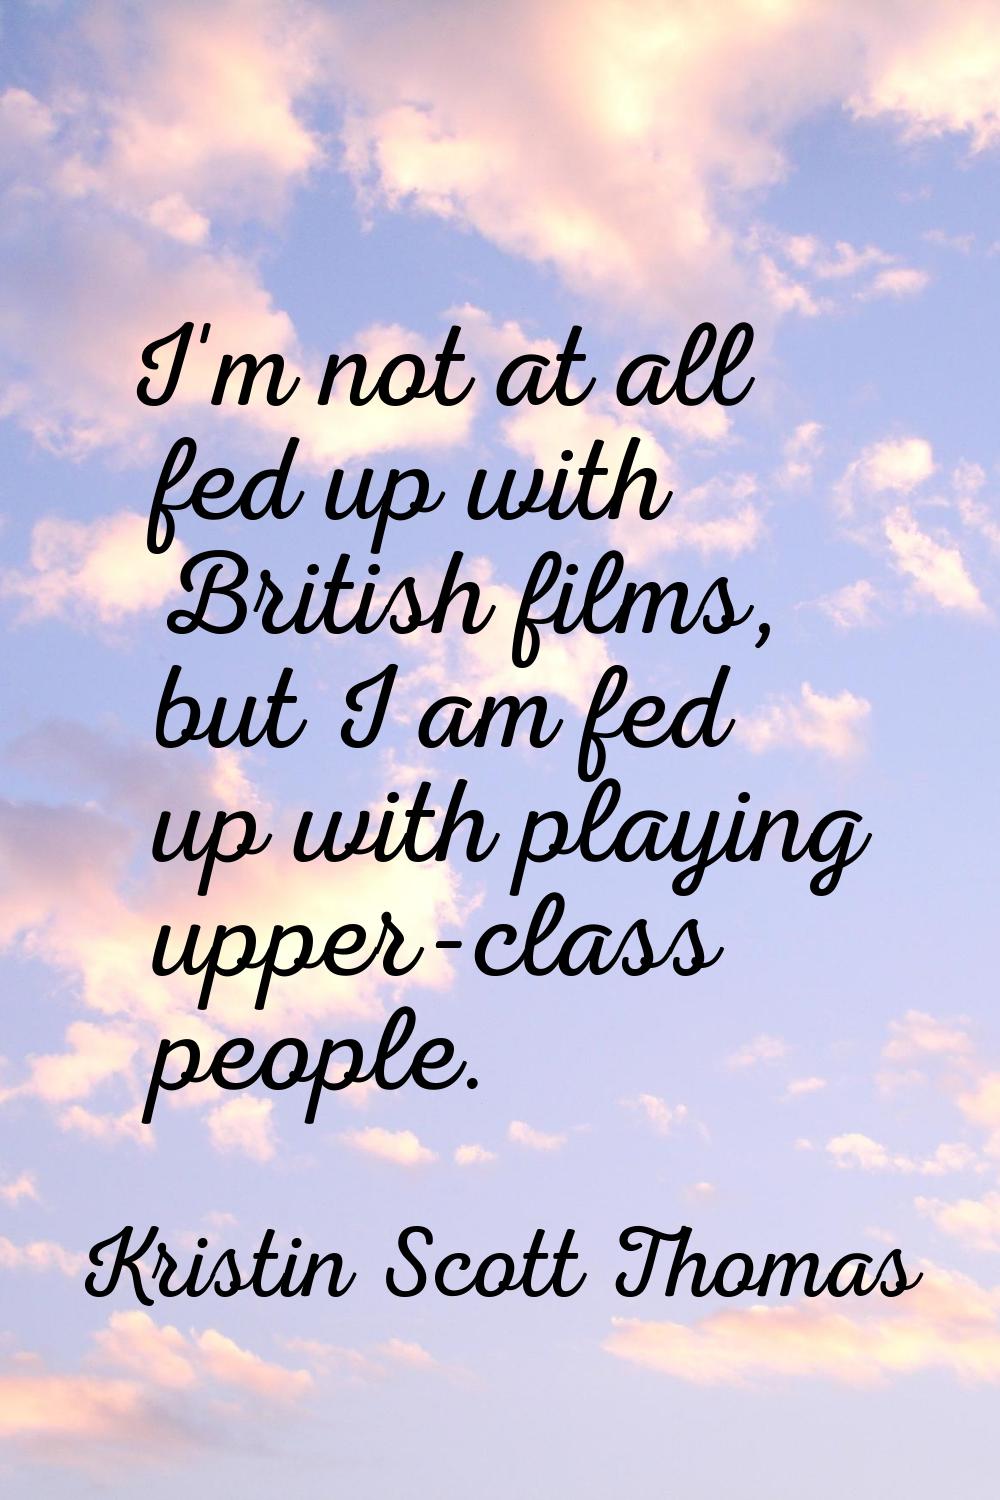 I'm not at all fed up with British films, but I am fed up with playing upper-class people.